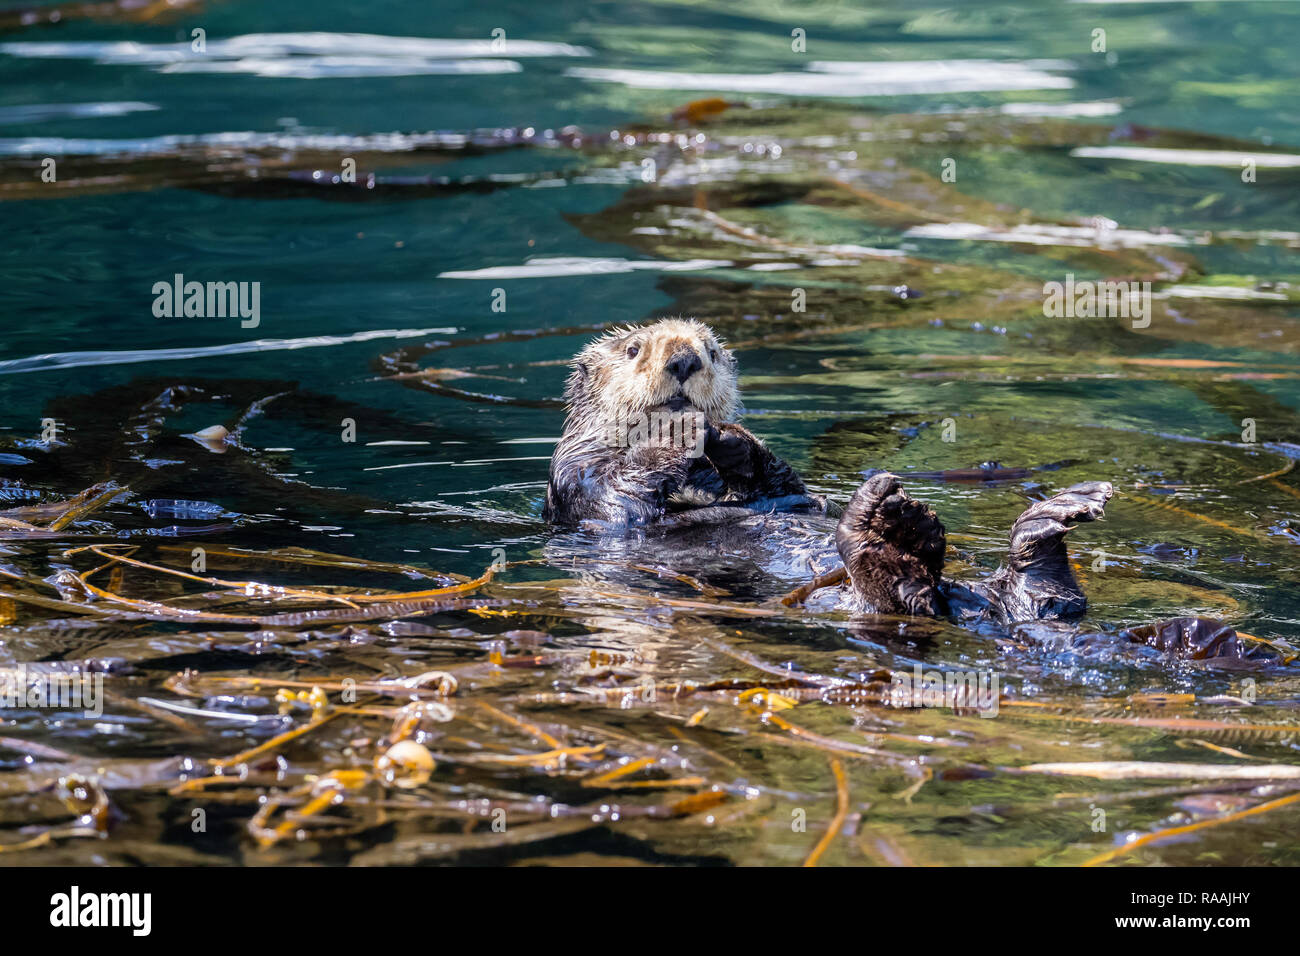 Adult sea otter, Enhydra lutris kenyoni, cleaning its fur in the Inian Islands, Southeast Alaska, USA. Stock Photo